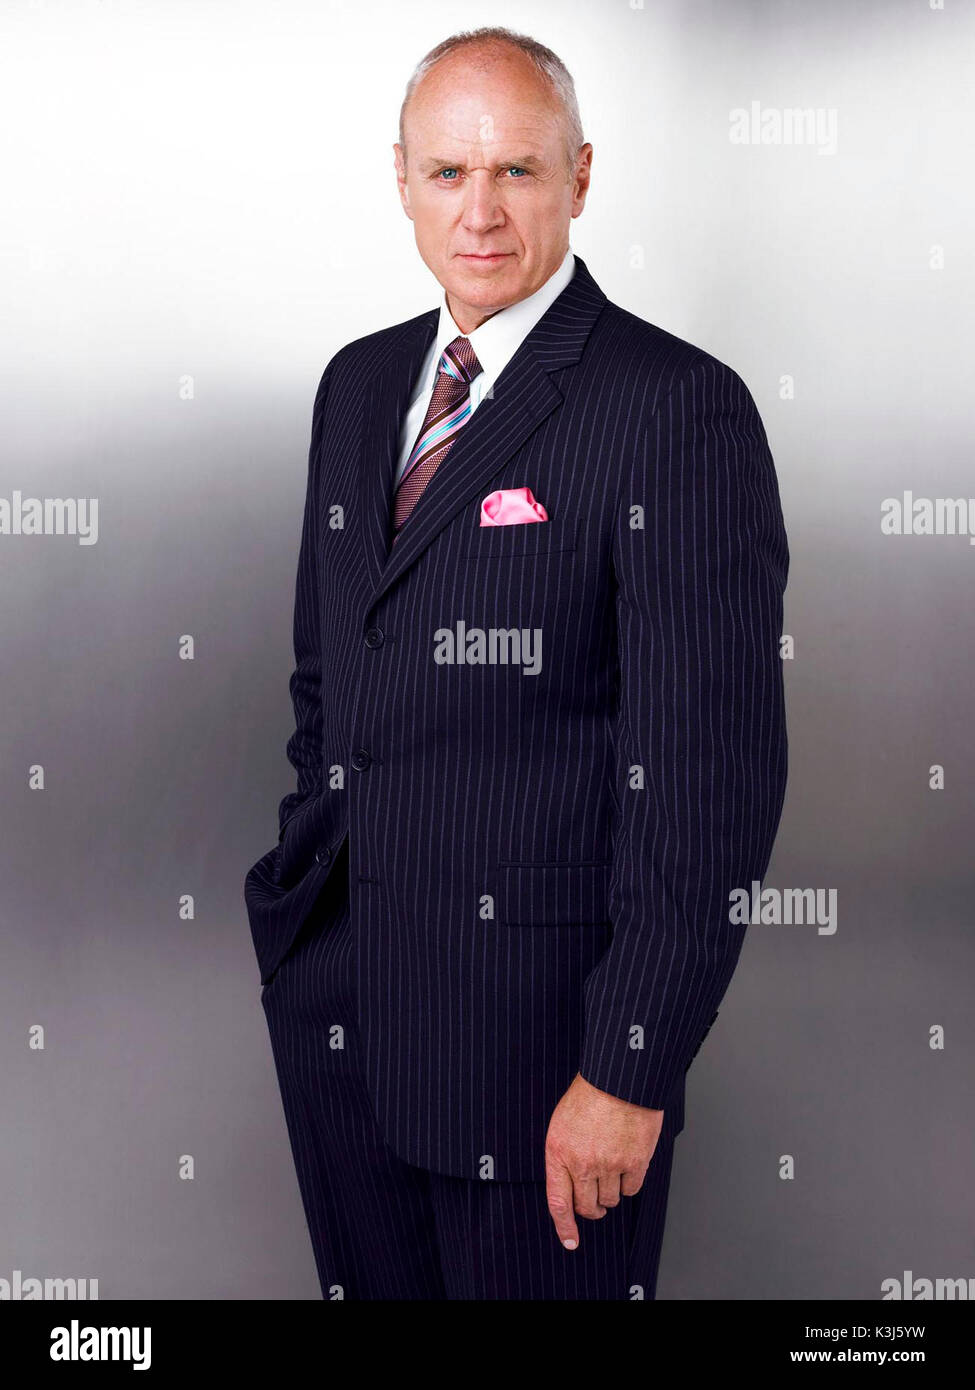 UGLY BETTY - ABC Television Network's Ugly Betty stars Alan Dale as Bradford Meade. (ABC/ANDREW ECCLES) UGLY BETTY [US TV SERIES 2006 - ]  Alan Dale as Bradford Meade  UGLY BETTY - ABC Television Network's Ugly Betty stars Alan Dale as Bradford Meade. (ABC/ANDREW ECCLES) Stock Photo